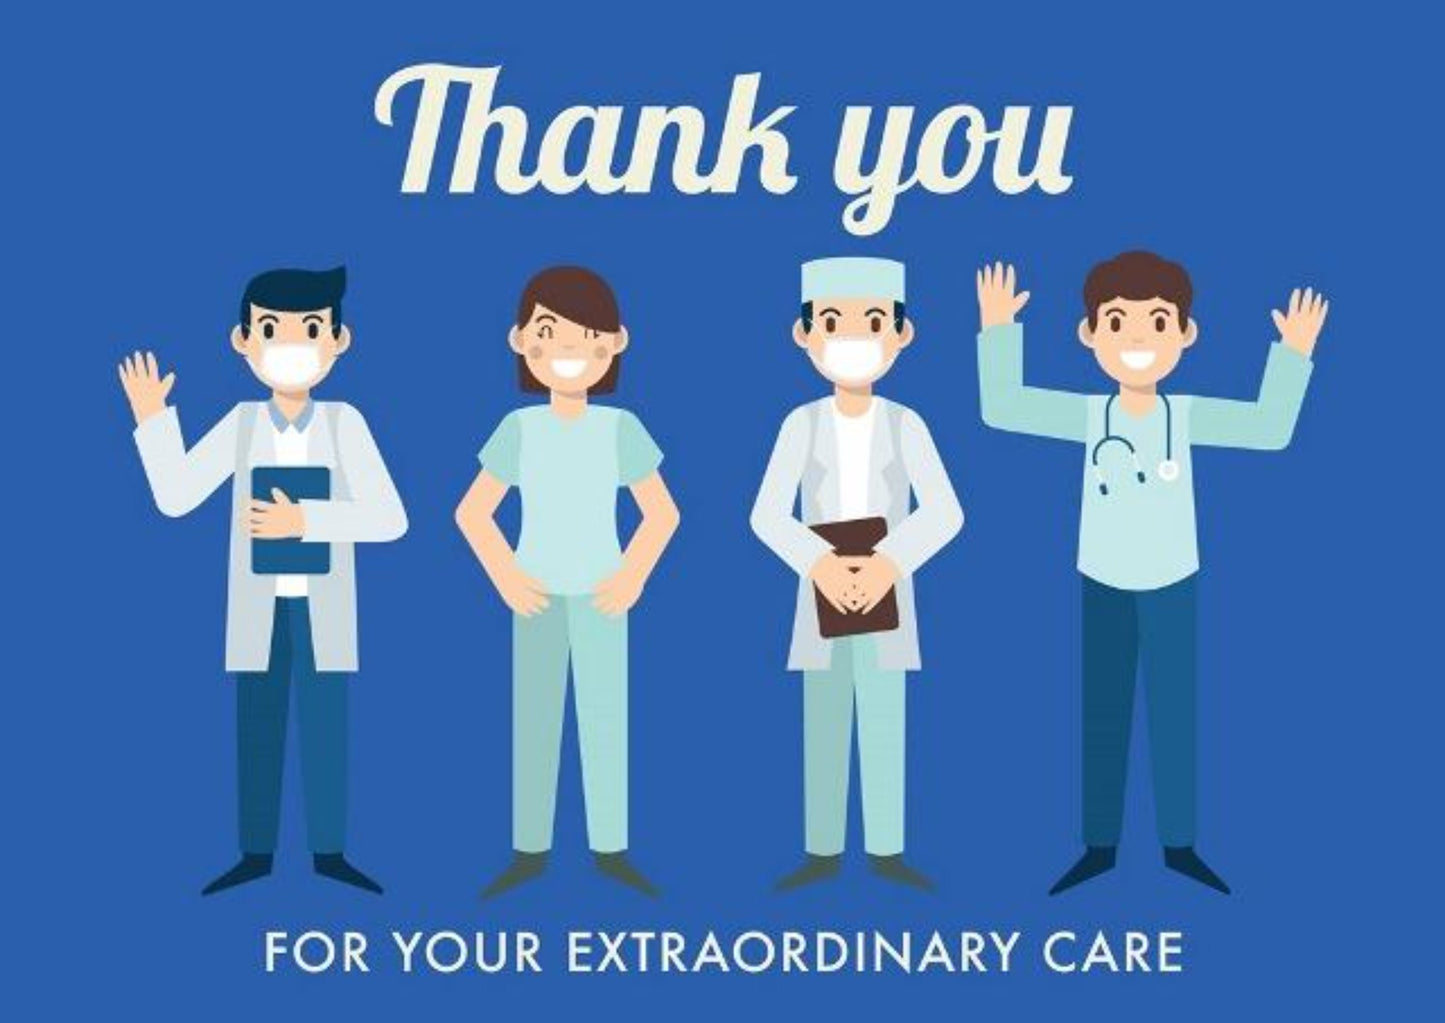 Thank You For Your Extraordinary Care - Frontline Workers Card.